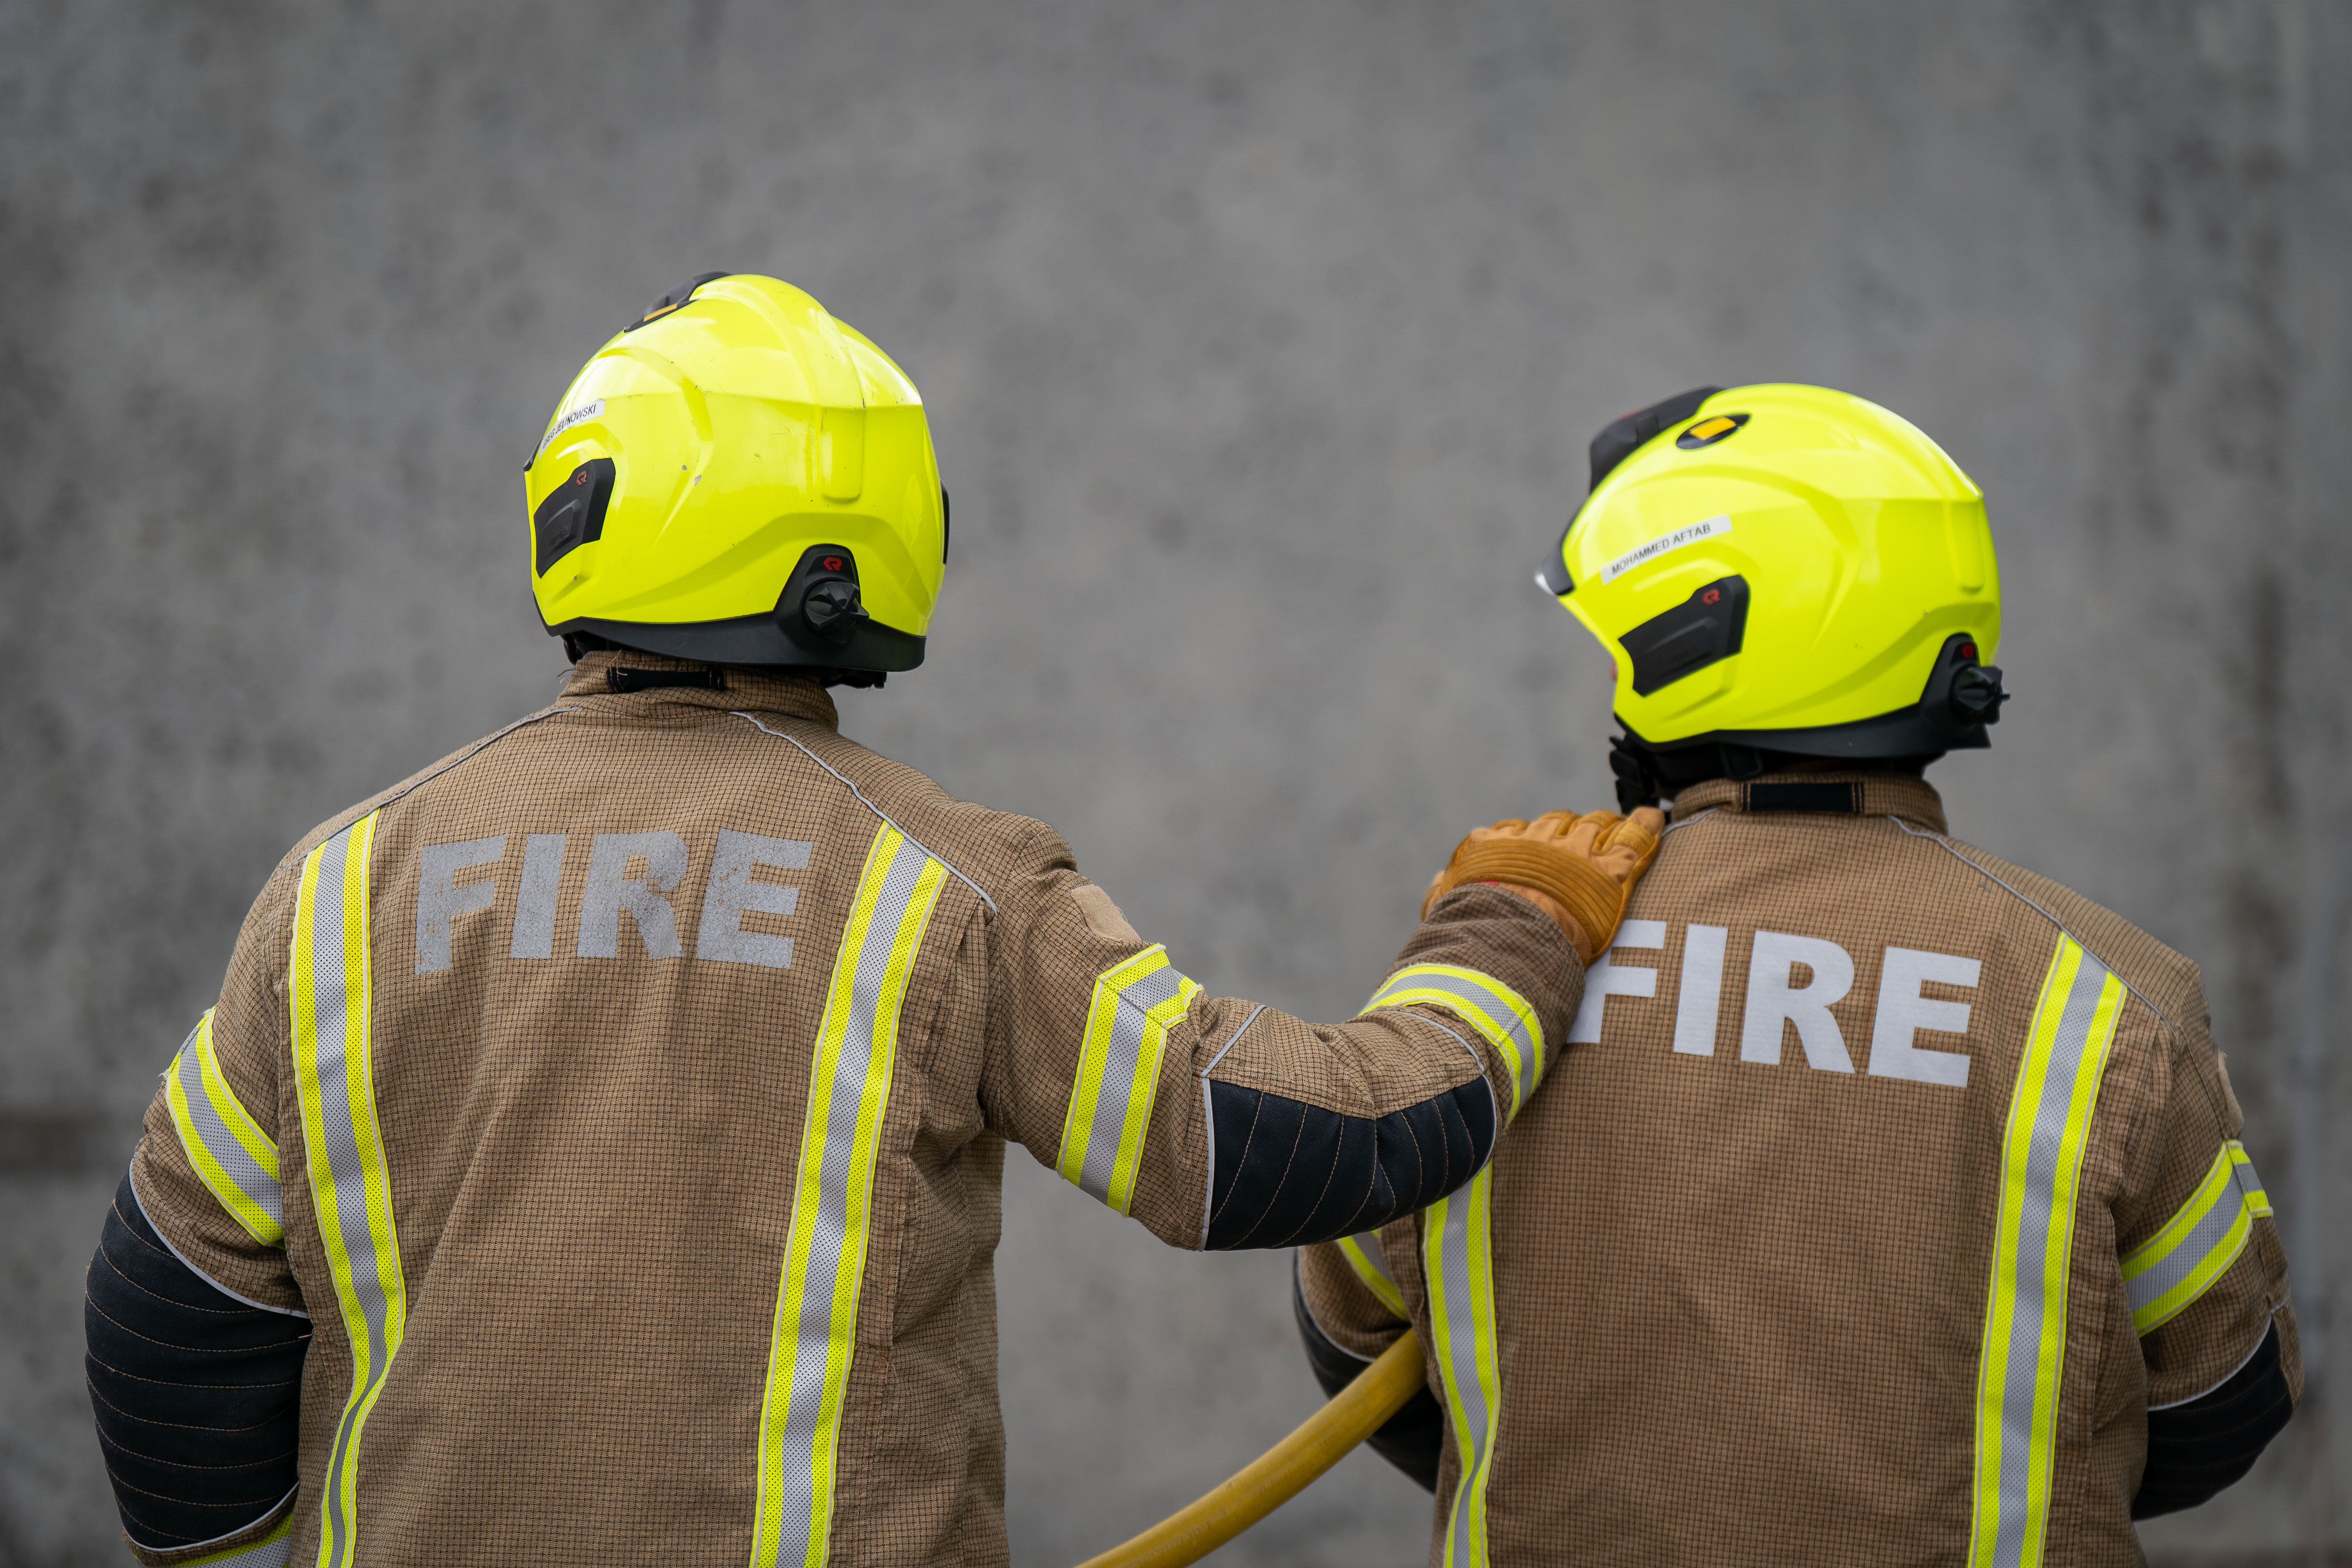 The Fire Brigades Union is currently balloting on strike action